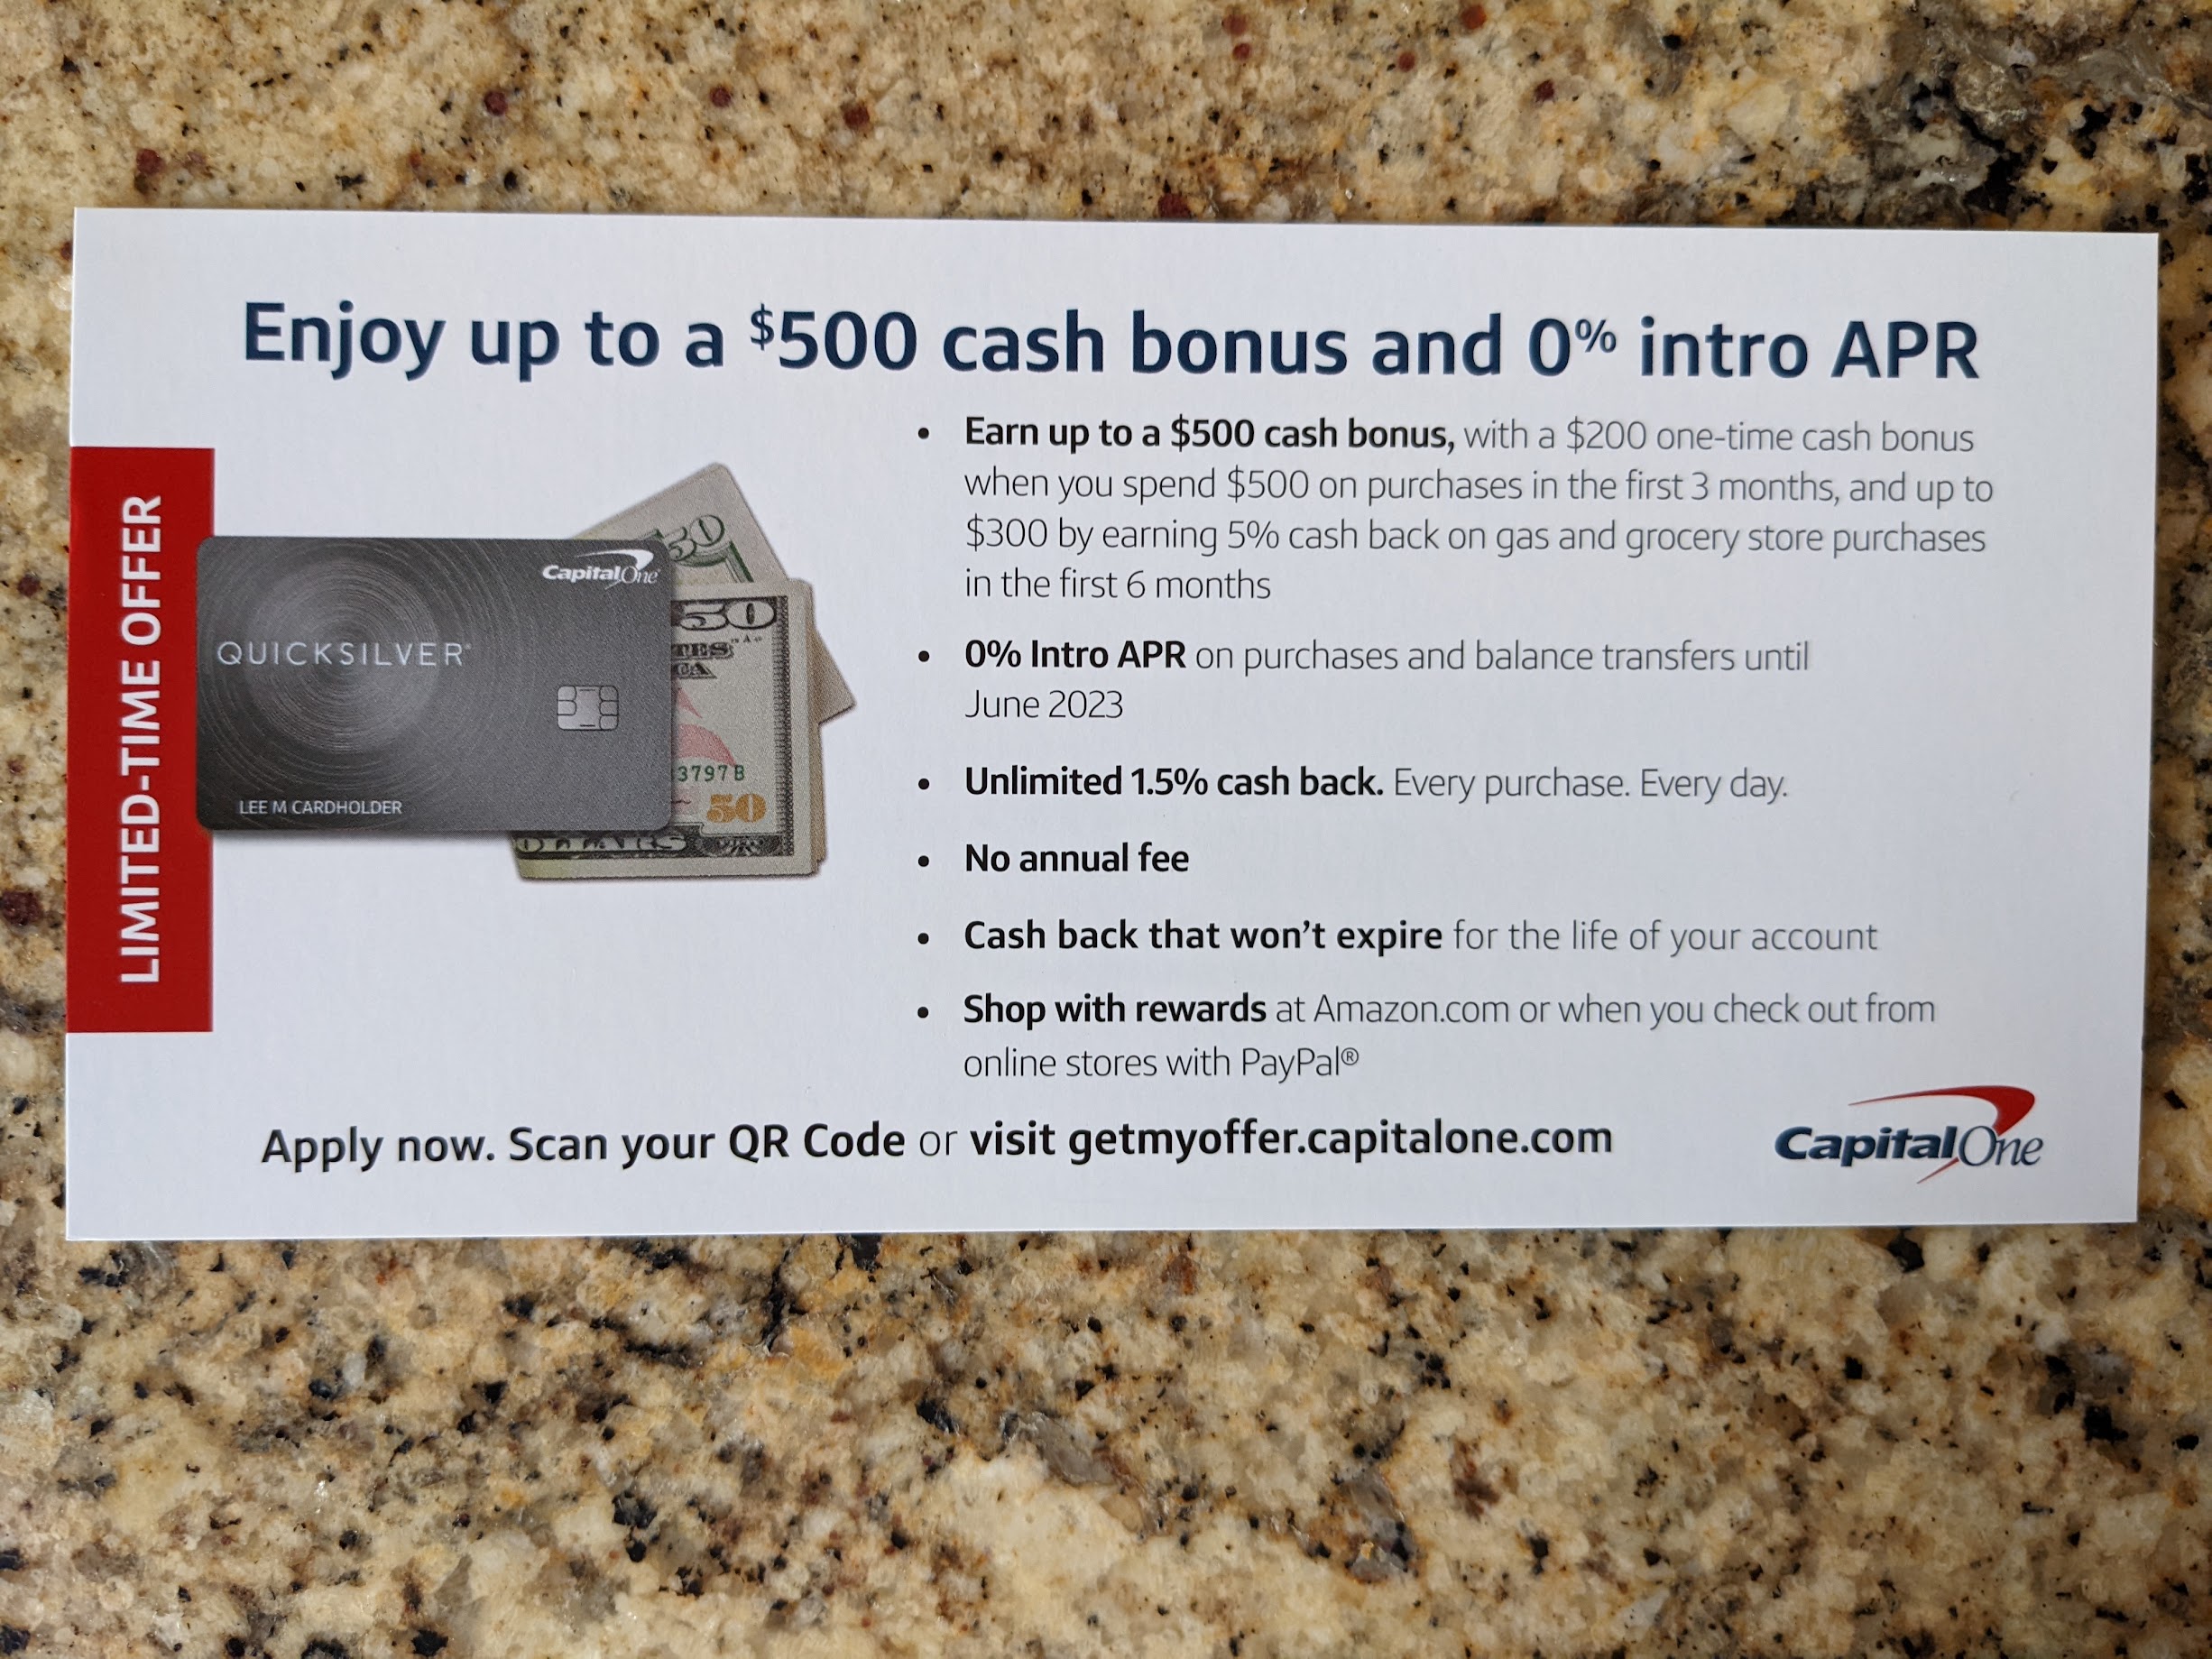 Targeted $500 Capital One Quicksilver offer via mailer